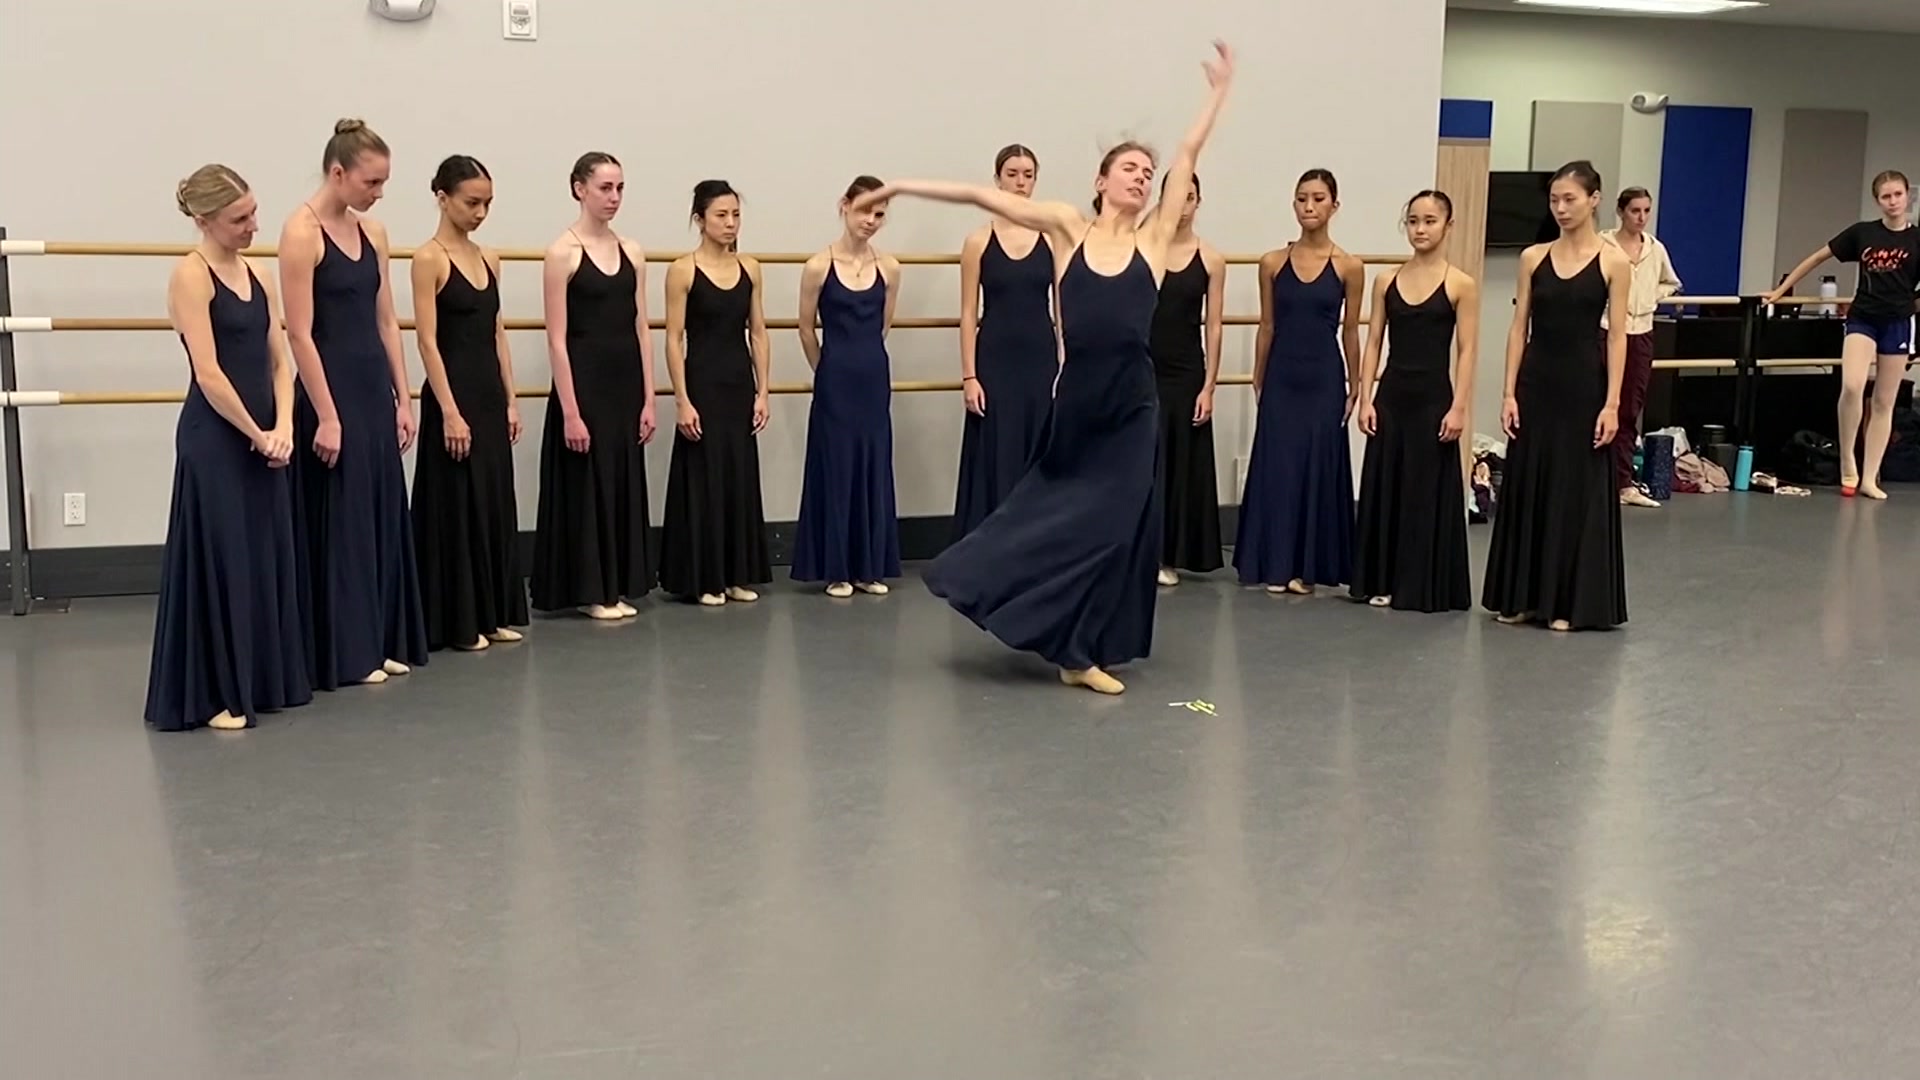 dance-and-fashion-stars-join-forces-in-new-jersey-ballet-company’s-‘purcell-suite’-–-news-12-new-jersey